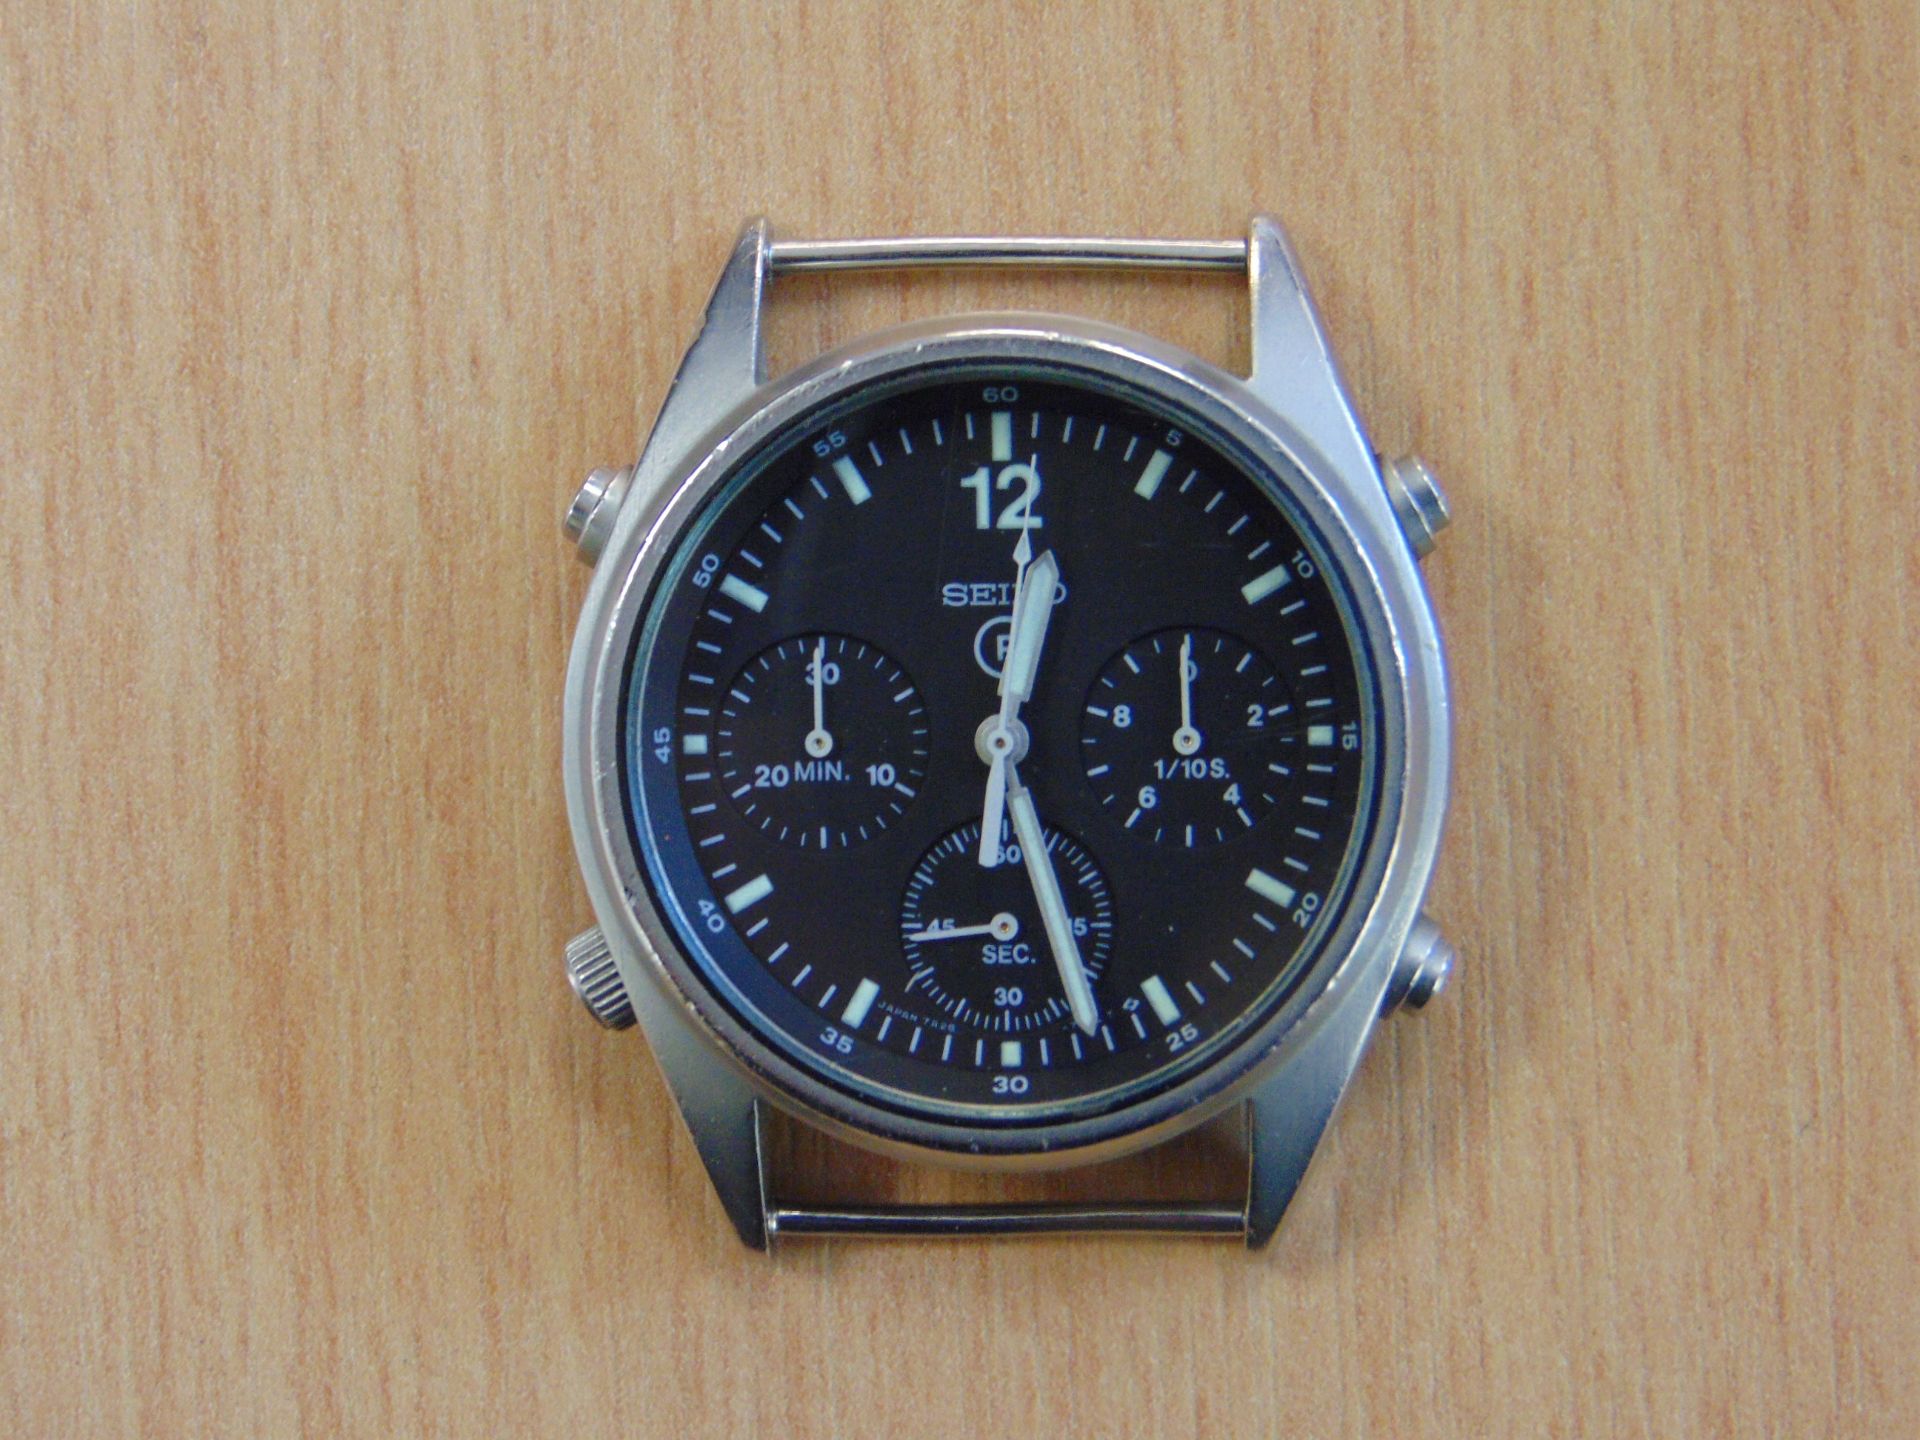 SEIKO GEN 1 PILOTS CHRONO RAF ISSUE WATCH NATO MARKINGS DATED 1984 - Image 3 of 9